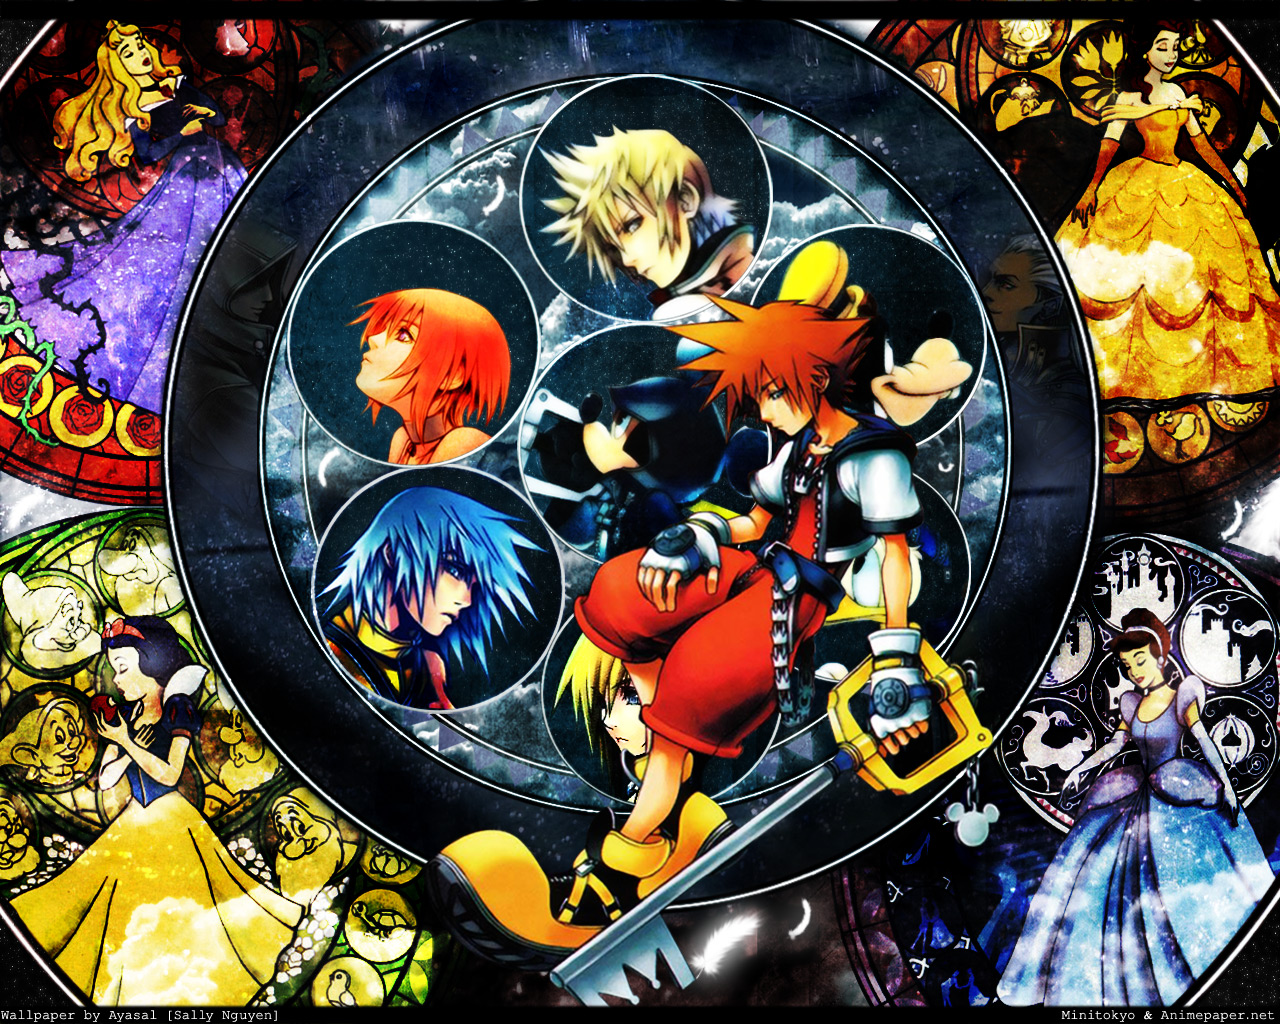 download free kingdom hearts 1.5 and 2.5